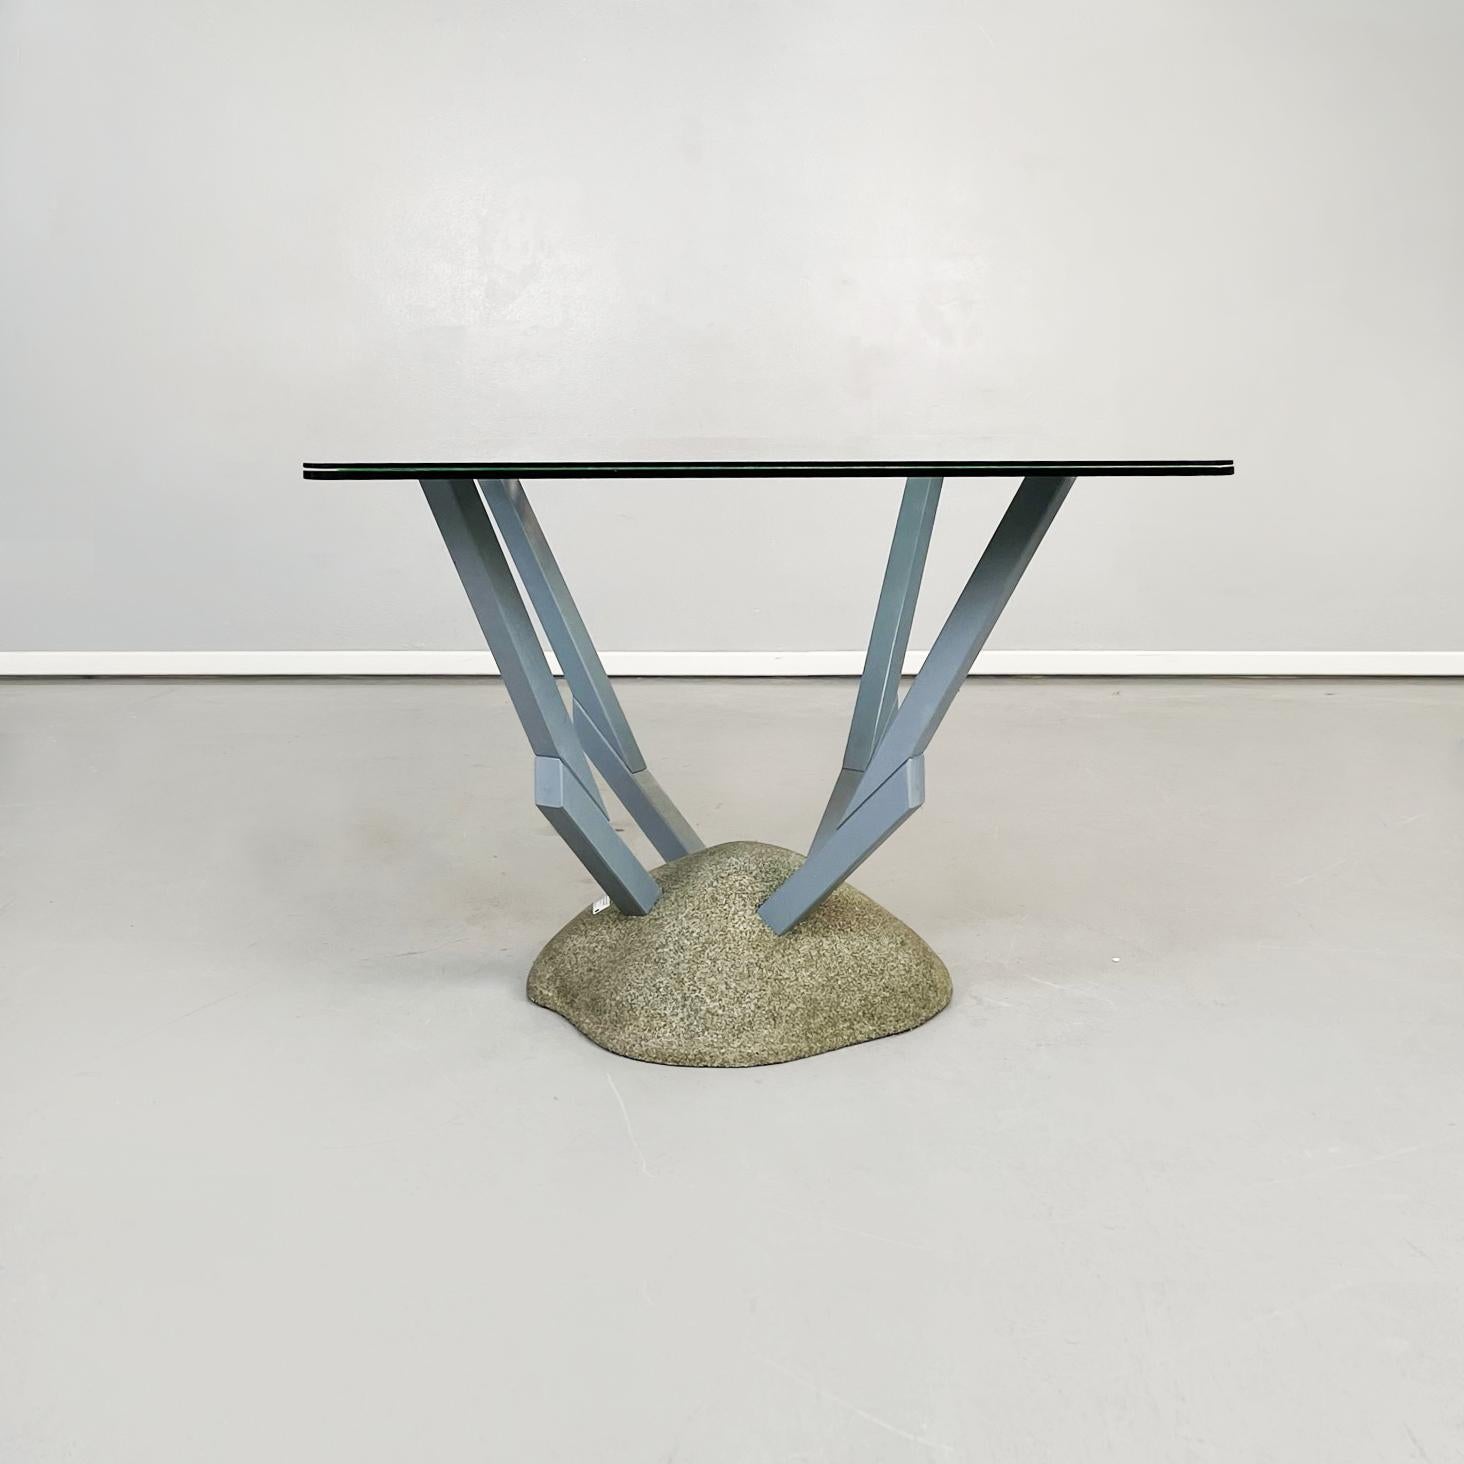 Mid-Century Modern Italian Modern Glass Fabric Wood Table Artifici by Deganello for Cassina, 1985 For Sale